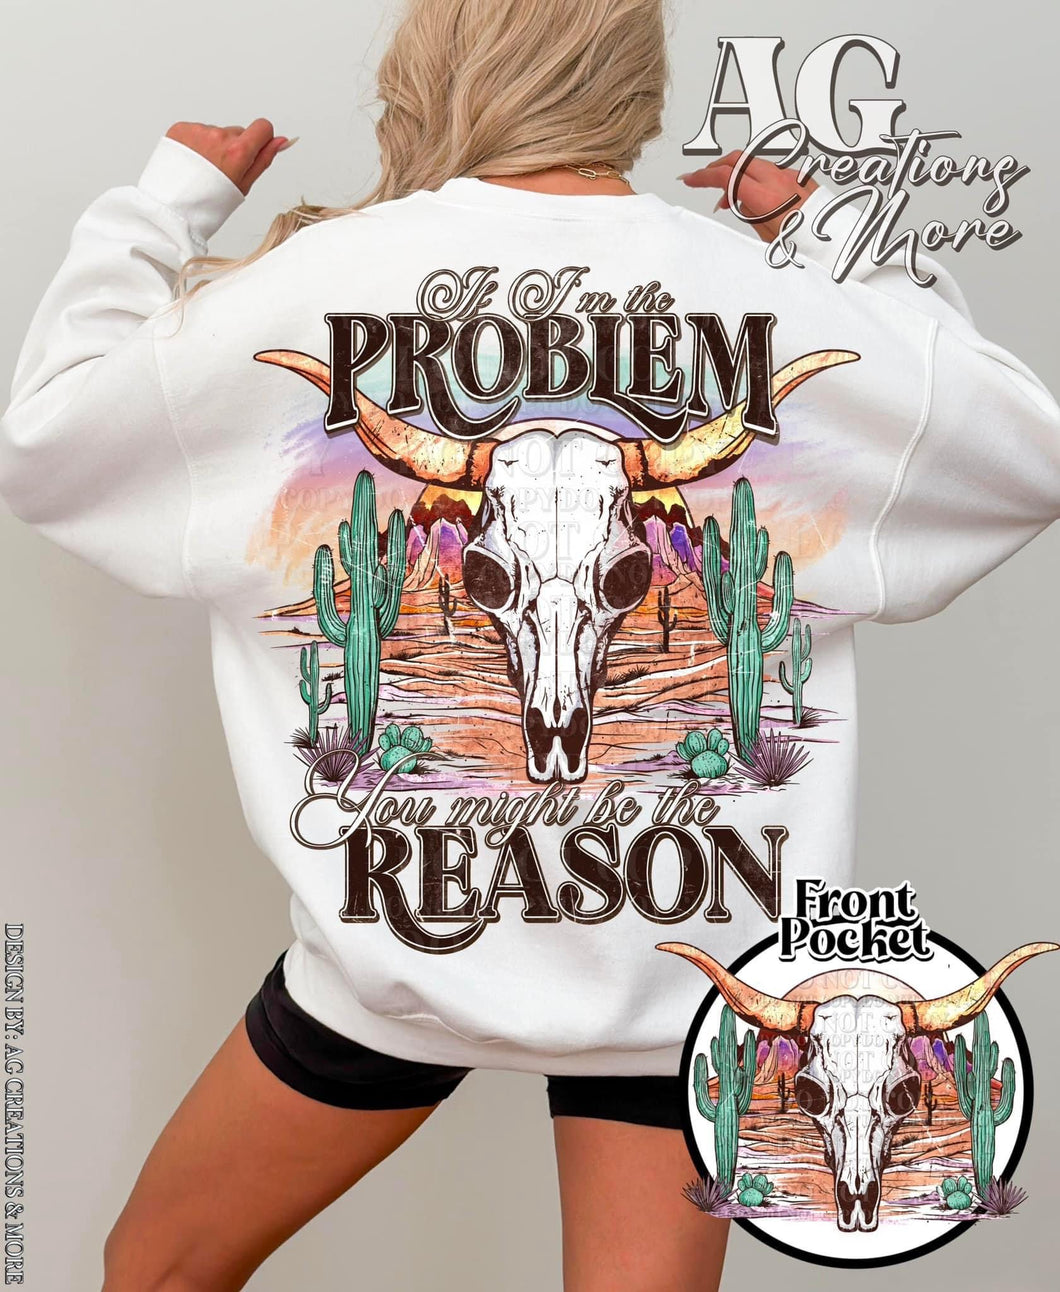 If I’m the problem - you might be the reason w/ front pocket cow skull design